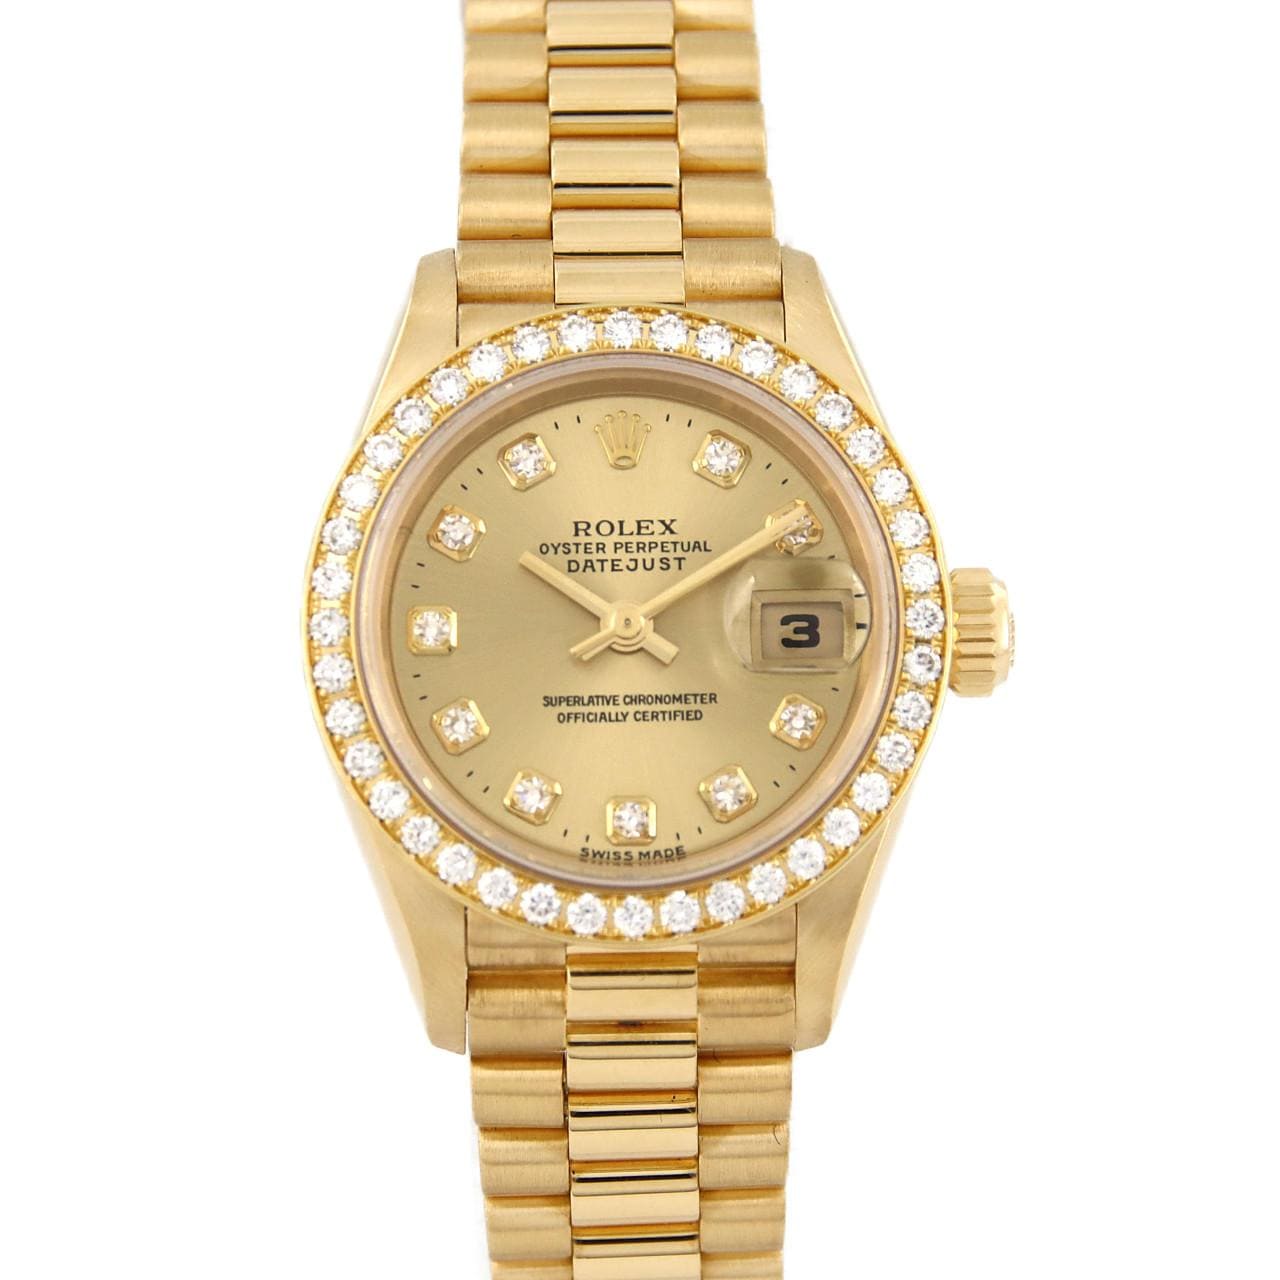 ROLEX Datejust 69138G YG Automatic W number